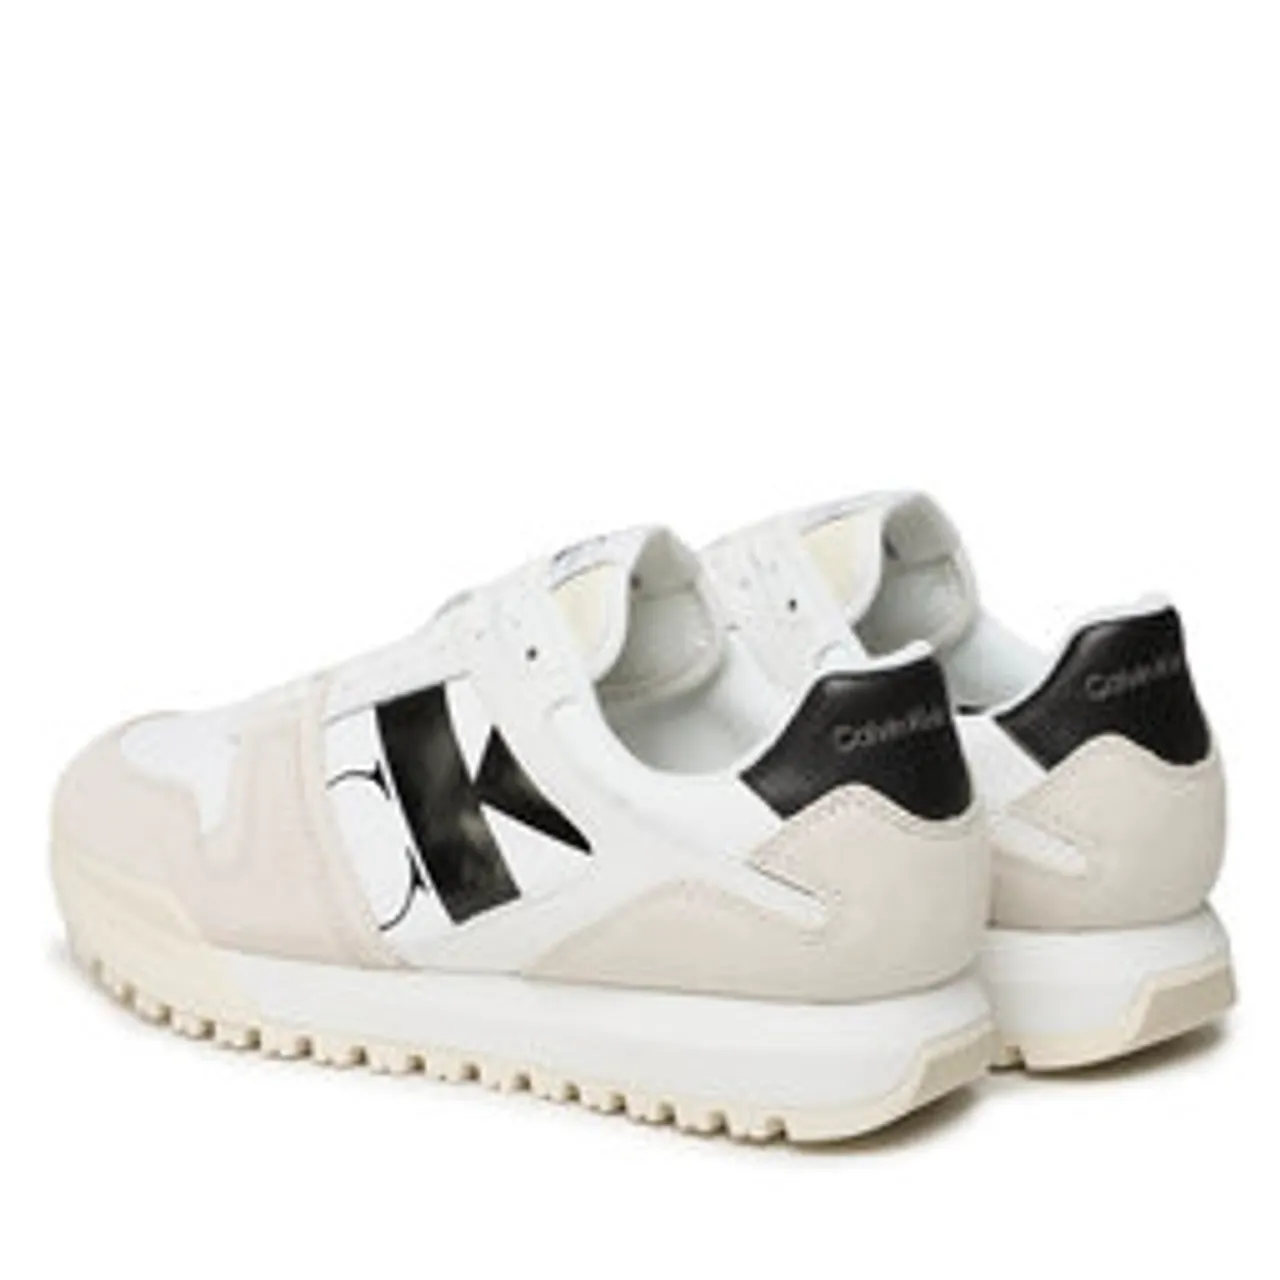 Sneakers Calvin Klein Jeans Toothy Run Laceup Low Lth Mix YM0YM00744 Bright White/Creamy White/Black YBR